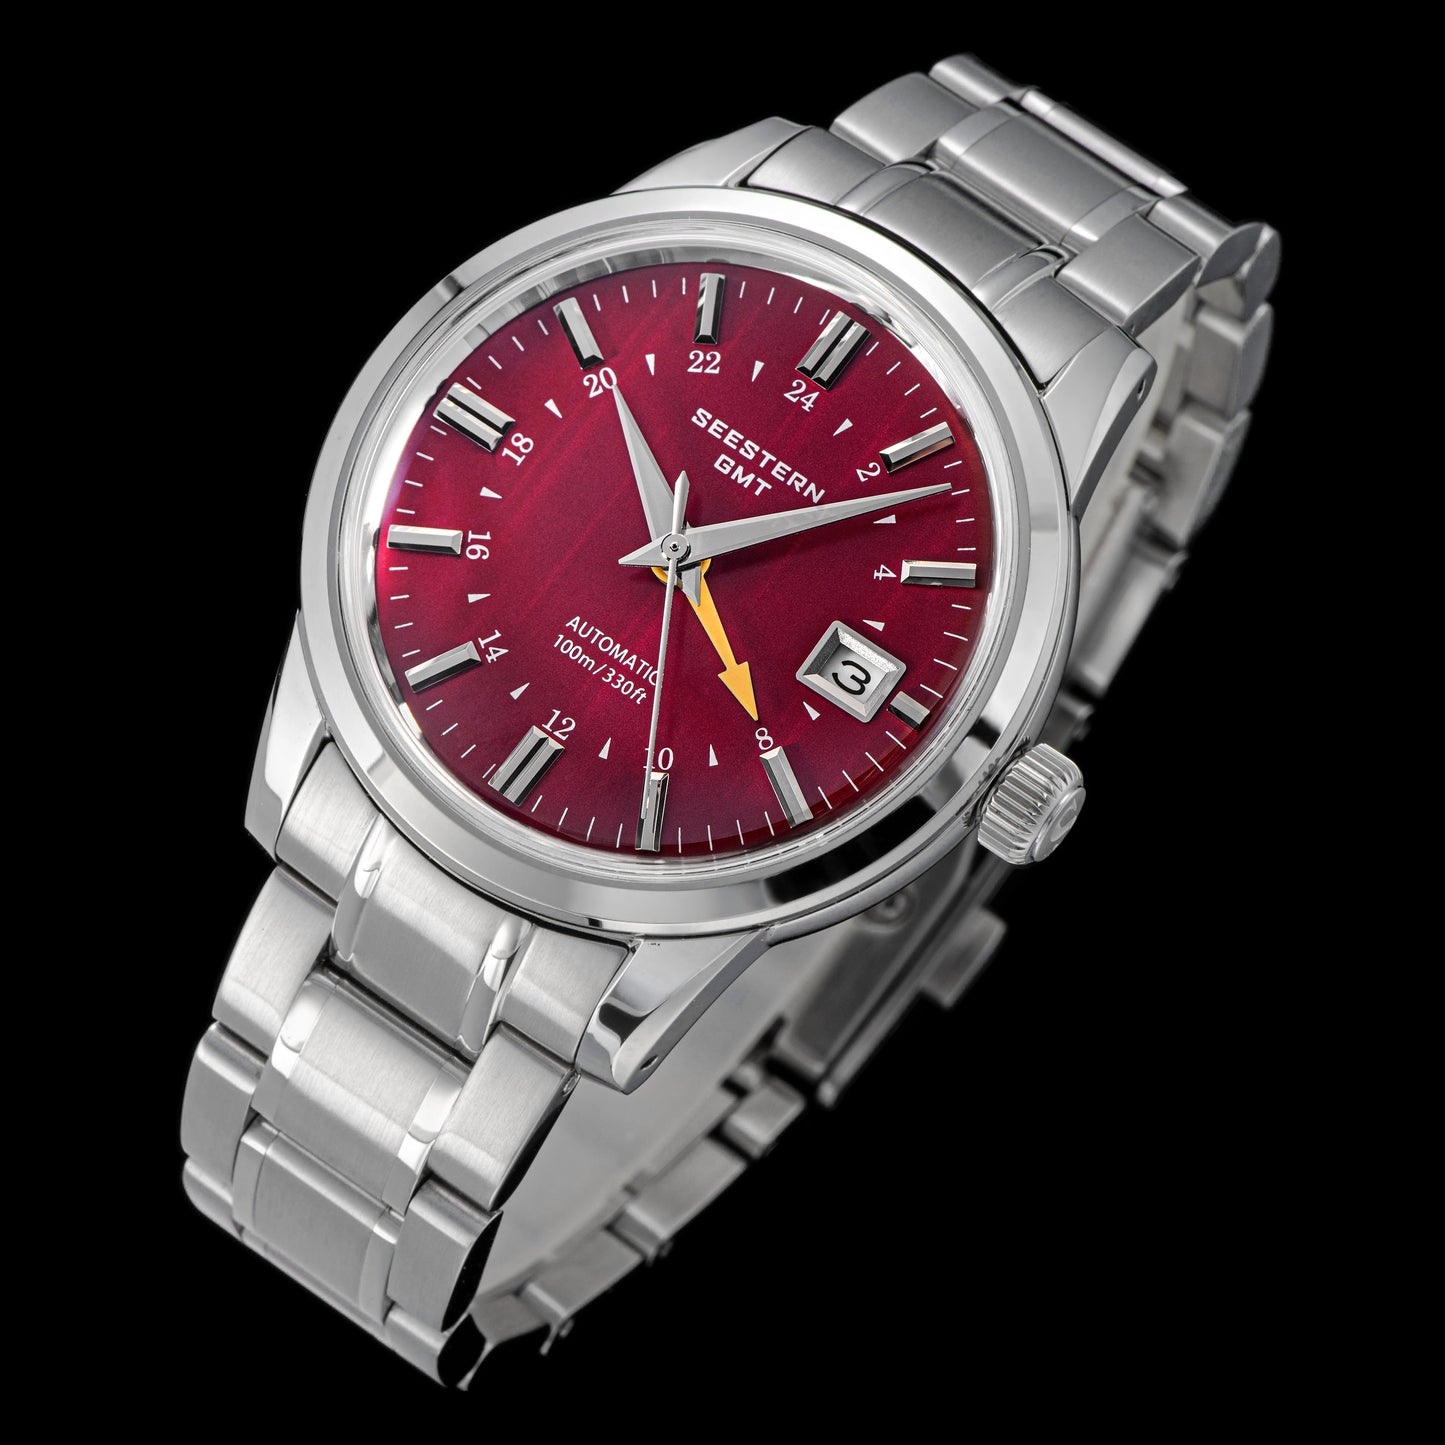 Seestern S446 GMT Watch Red Dial (Seiko NH34 GMT movement)